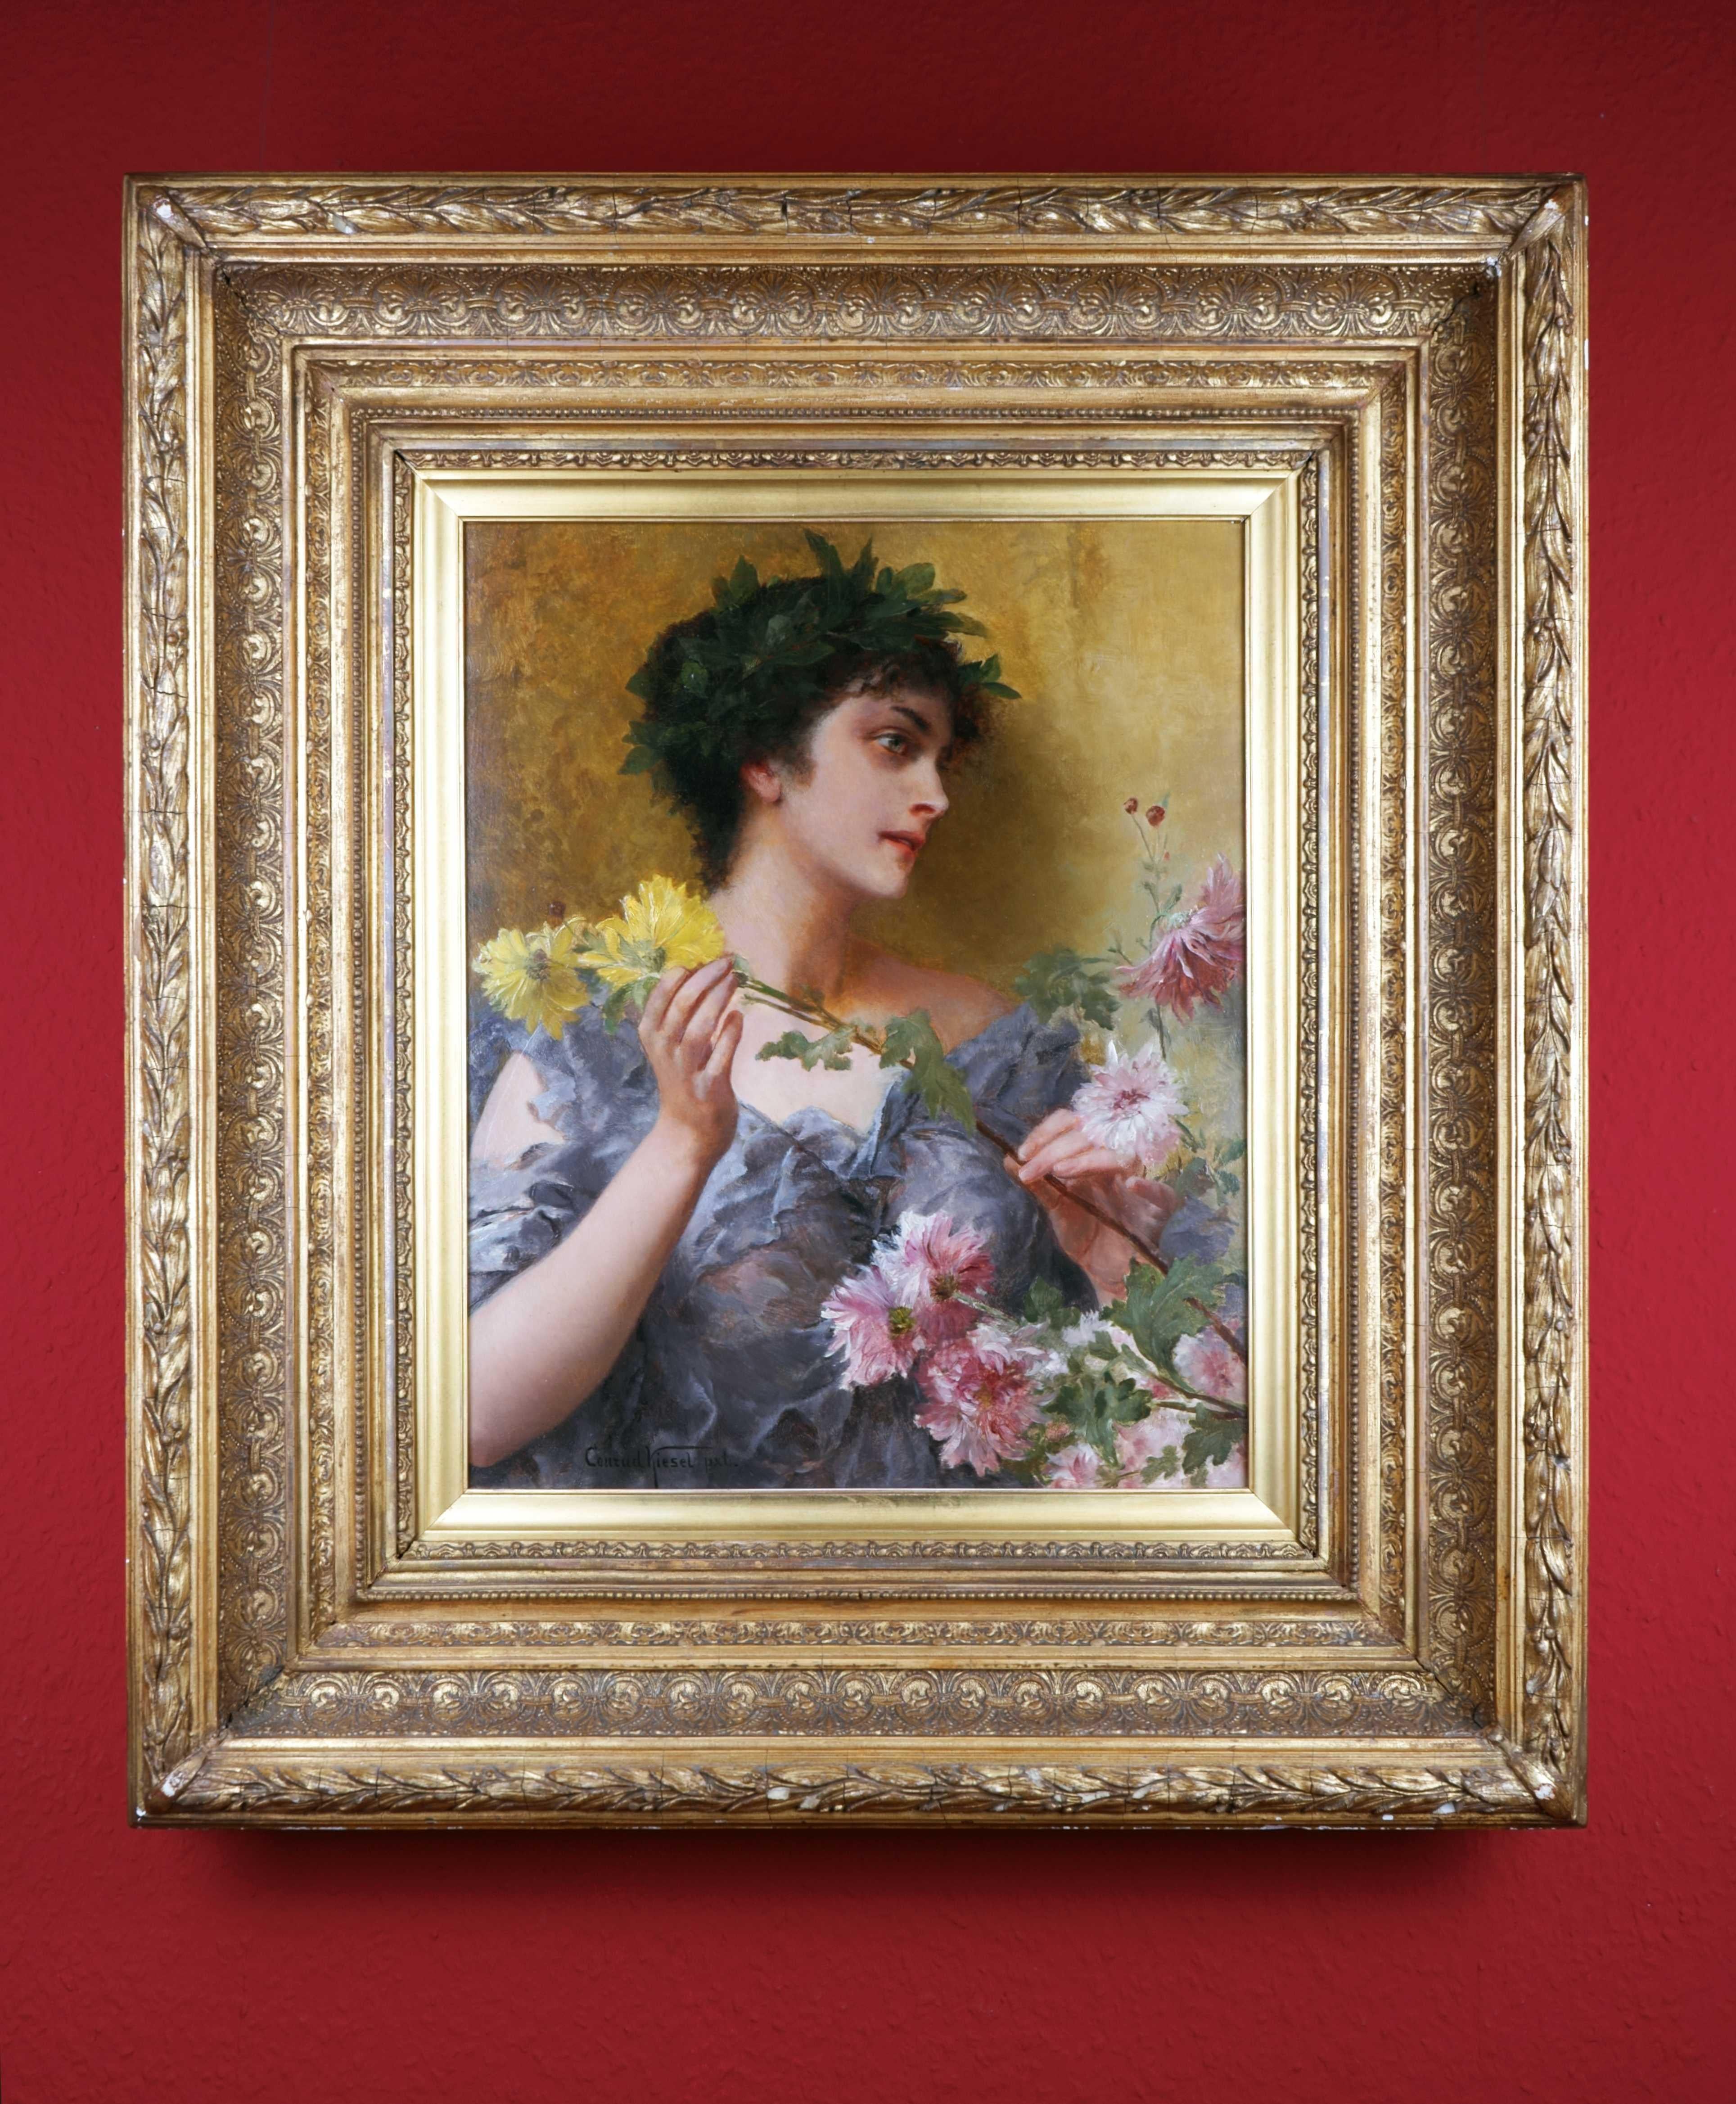 The gift of flowers - Academic Painting by Conrad Kiesel